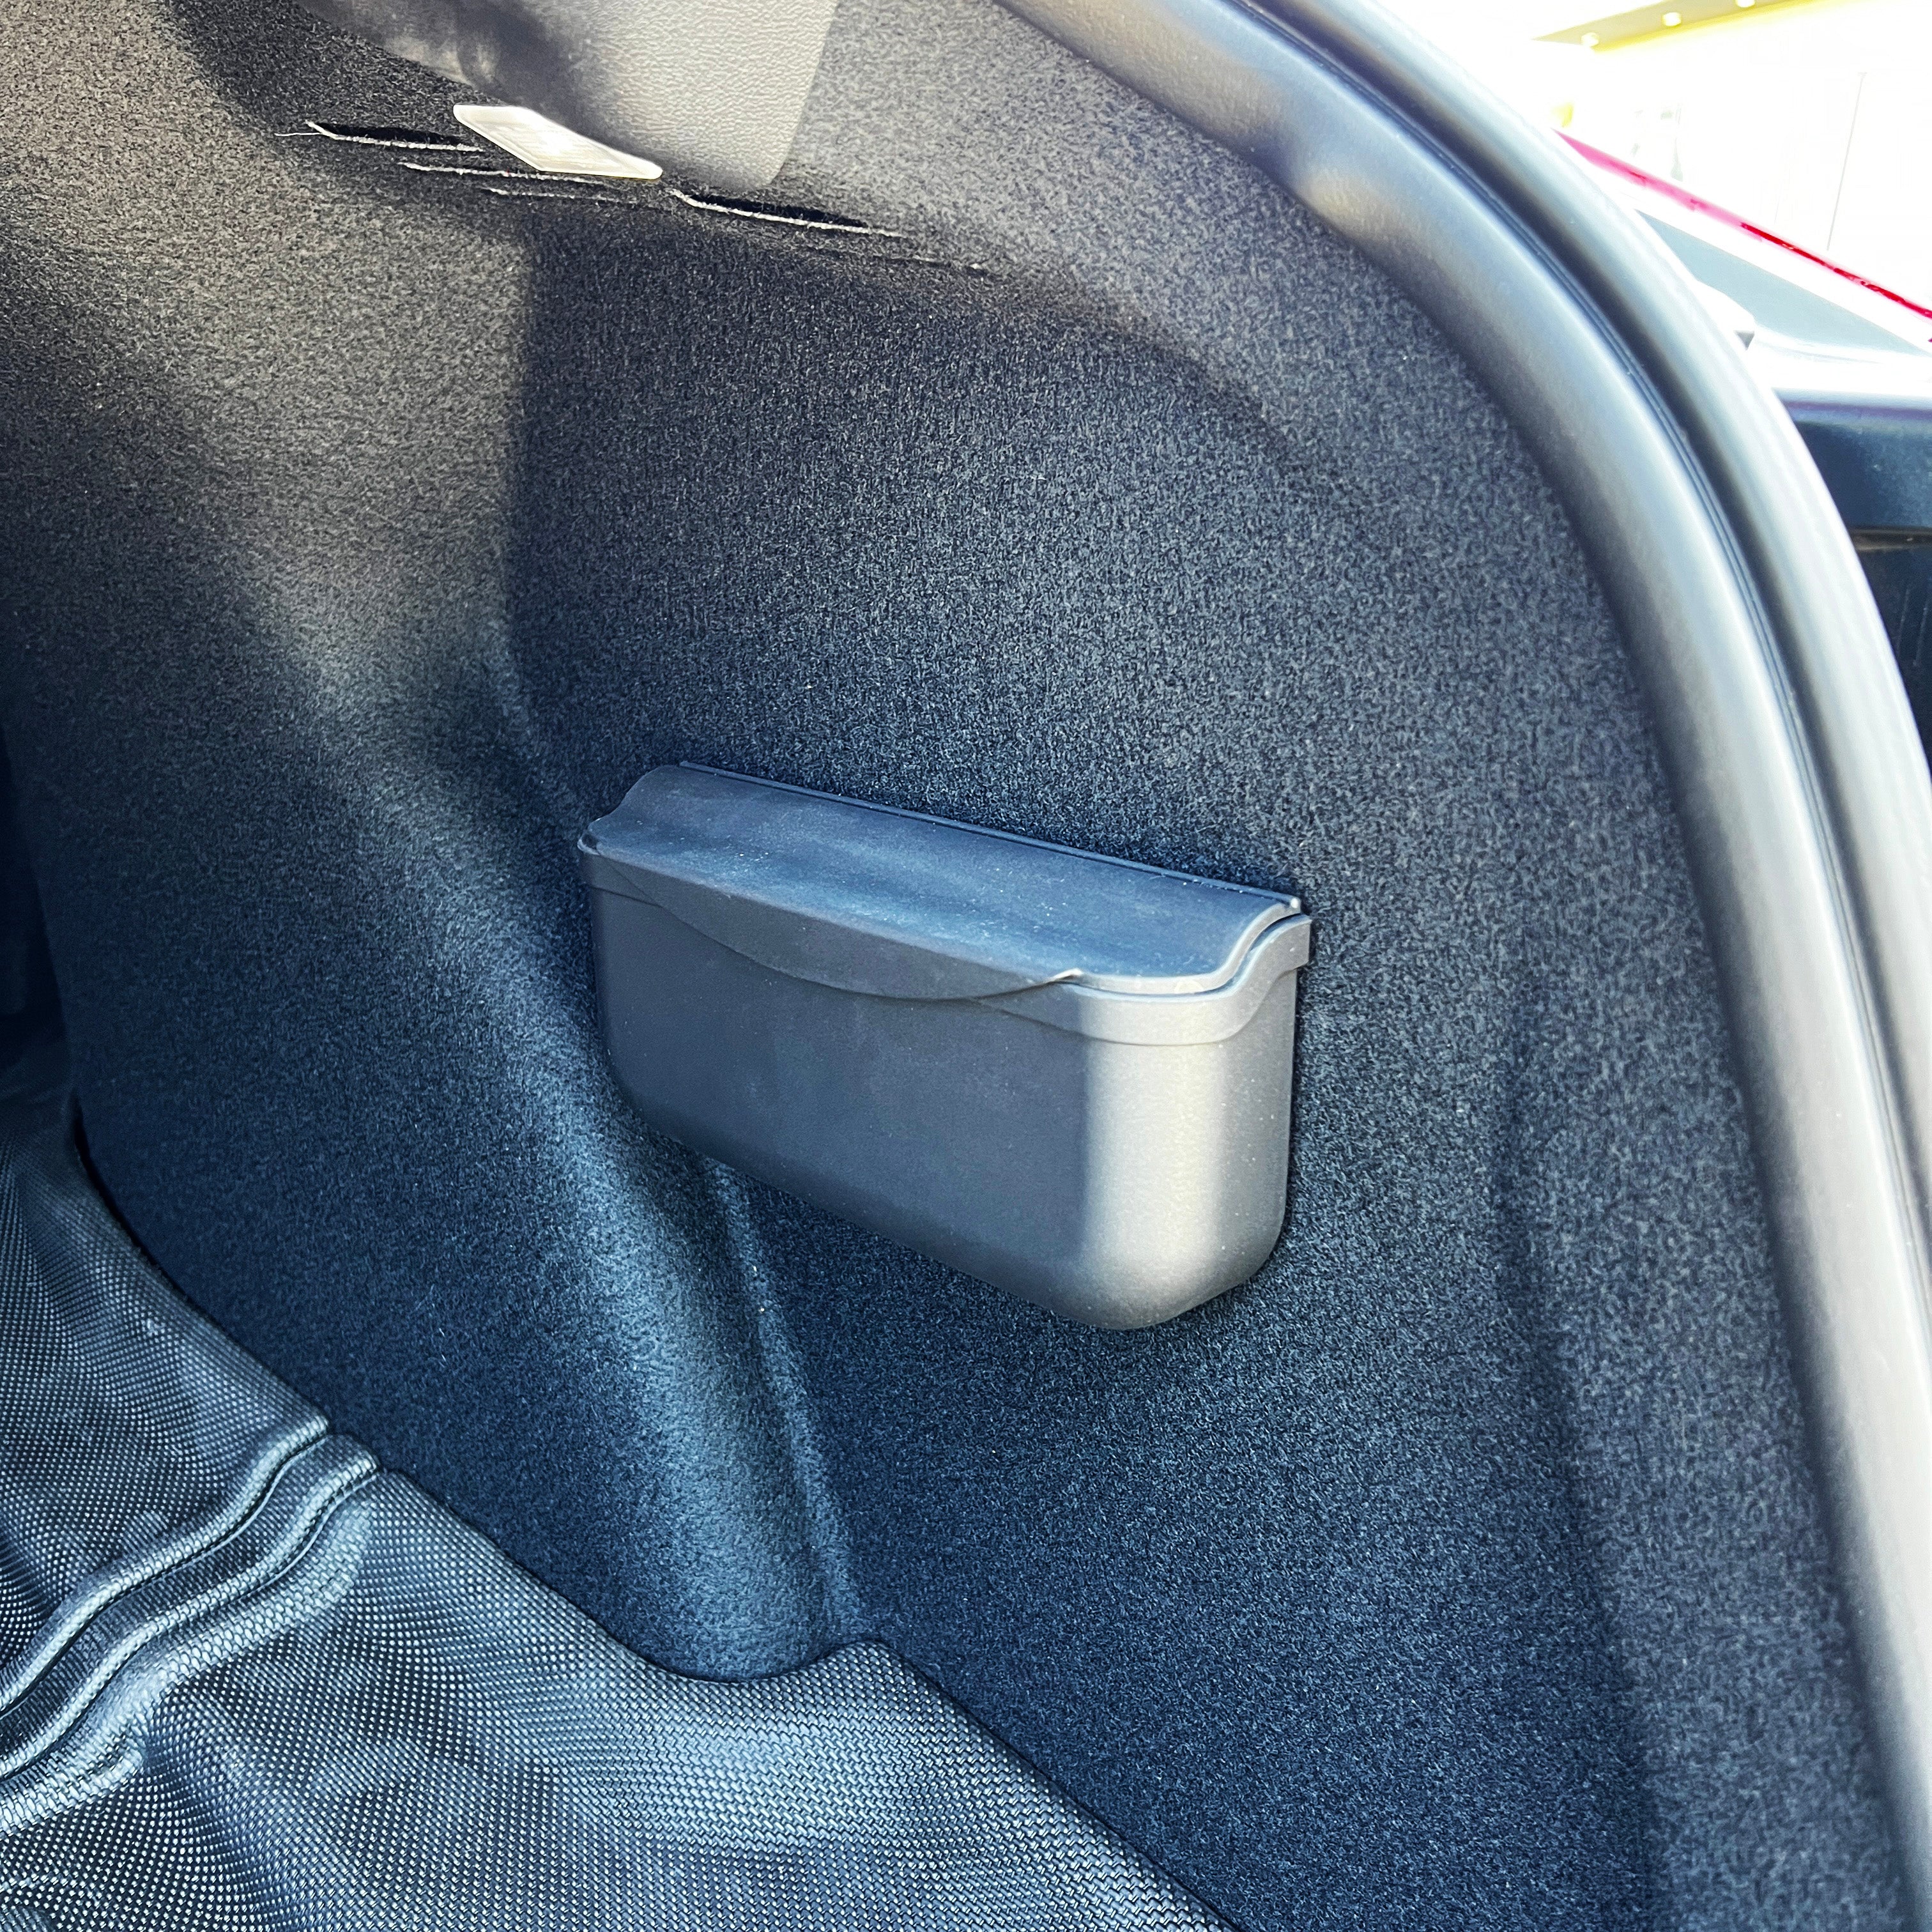 Velcro cubby installed in trunk